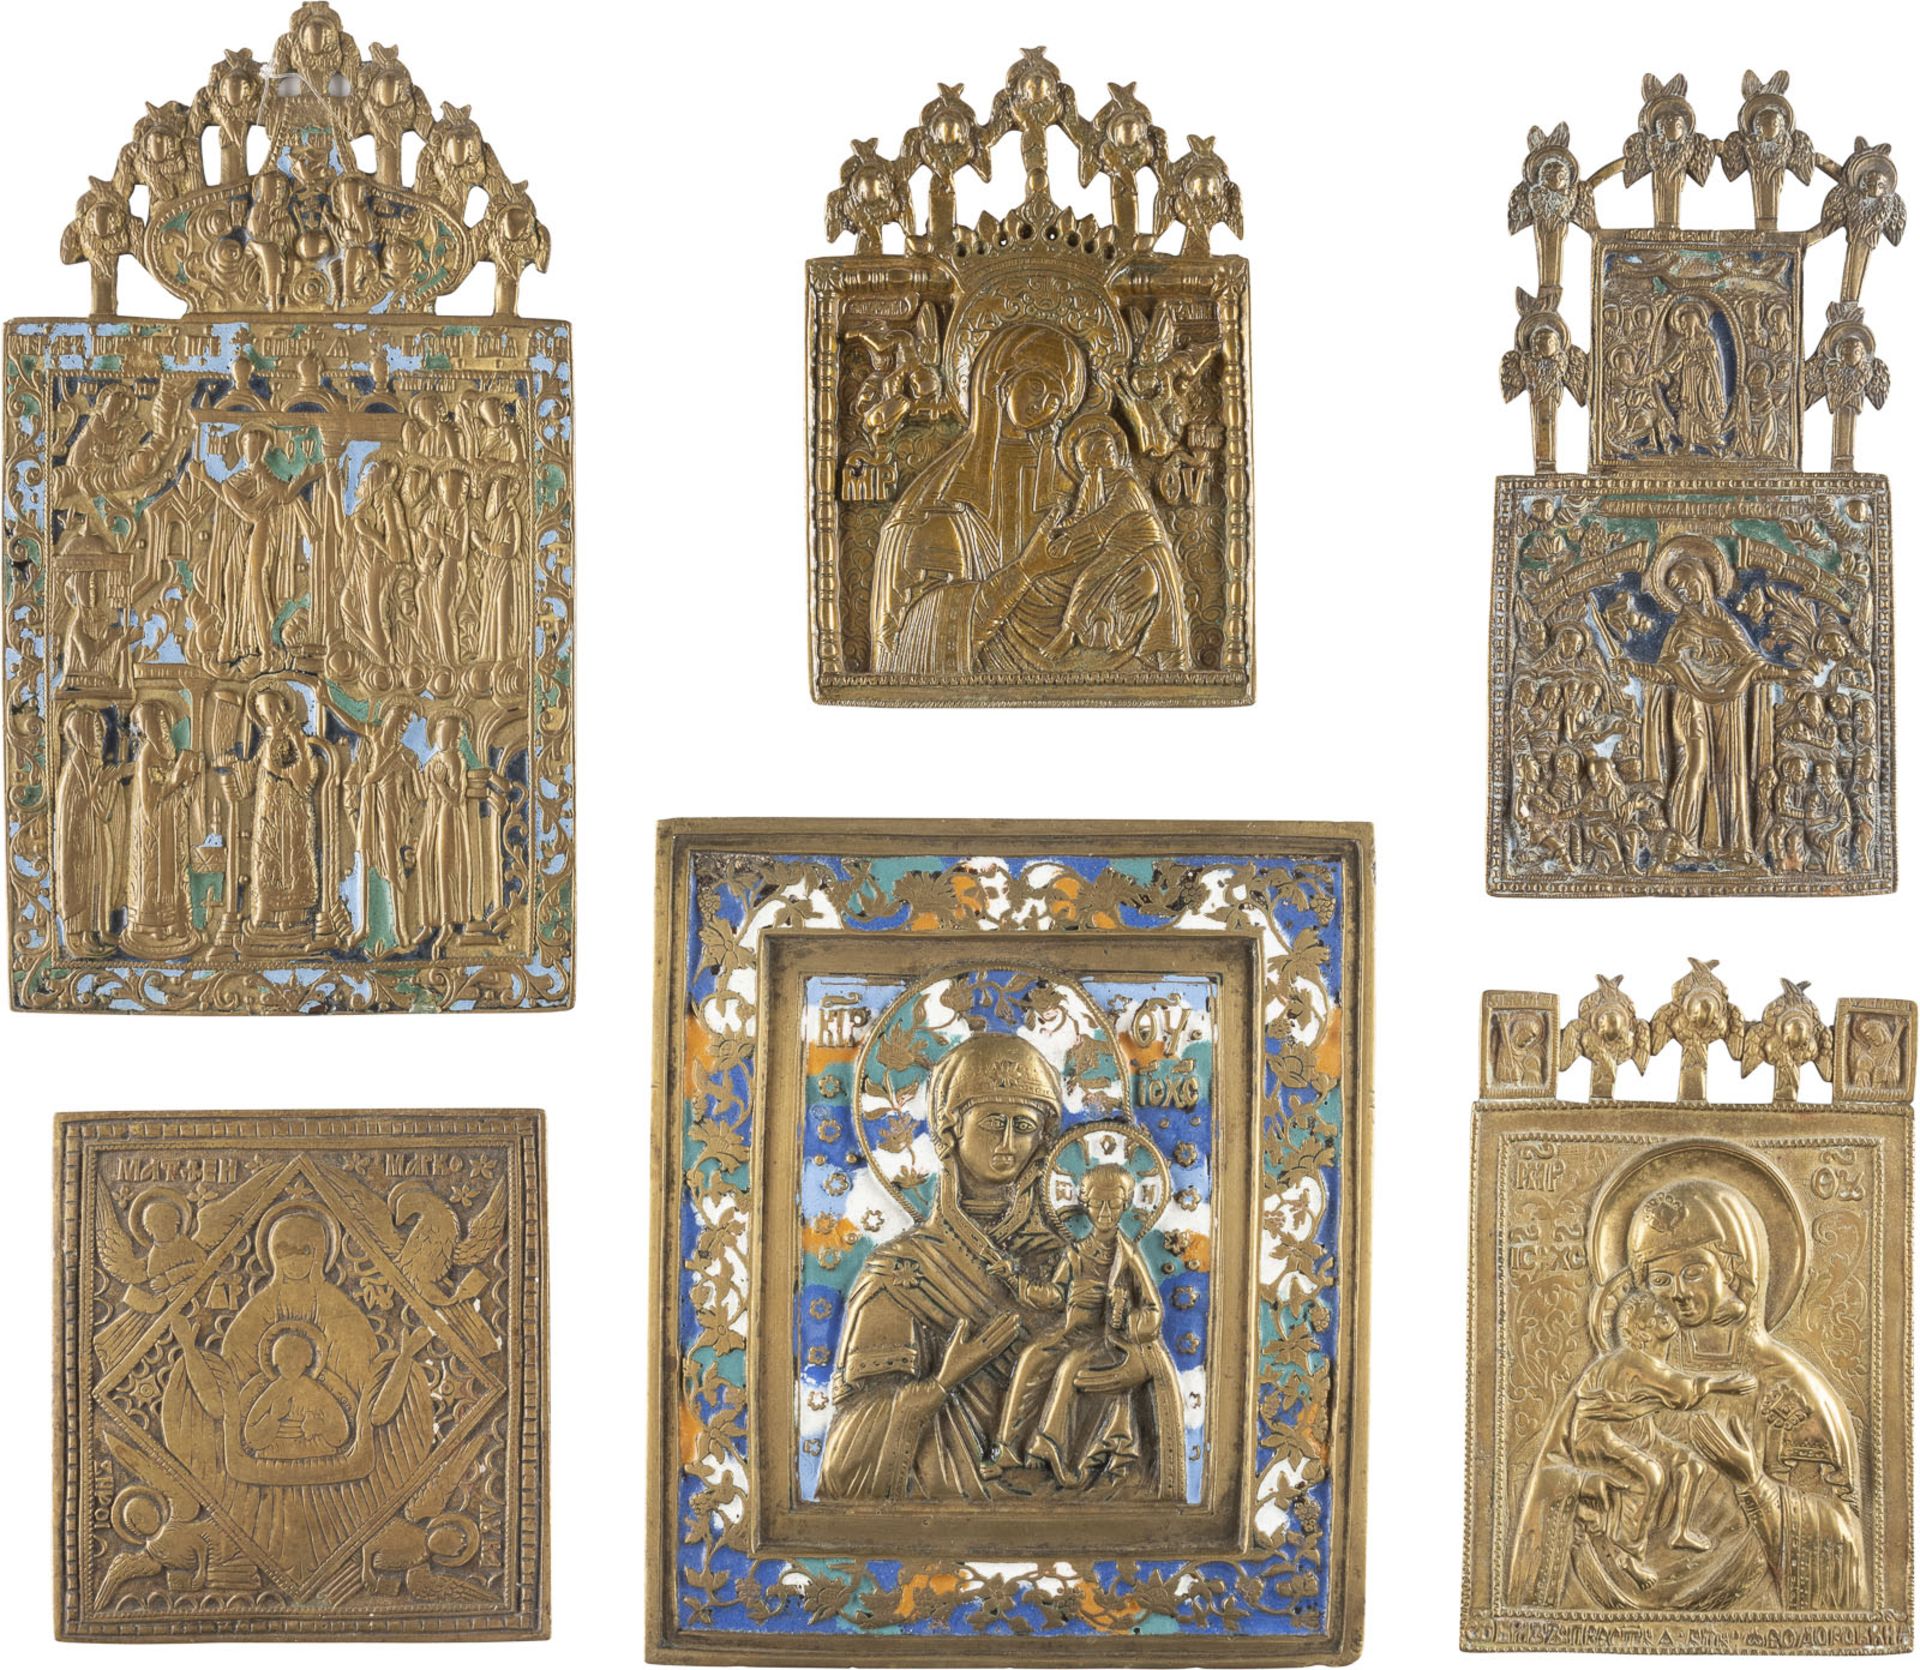 A COLLECTION OF SIX BRASS AND ENAMEL ICONS SHOWING IMAGES OF THE MOTHER OF GOD